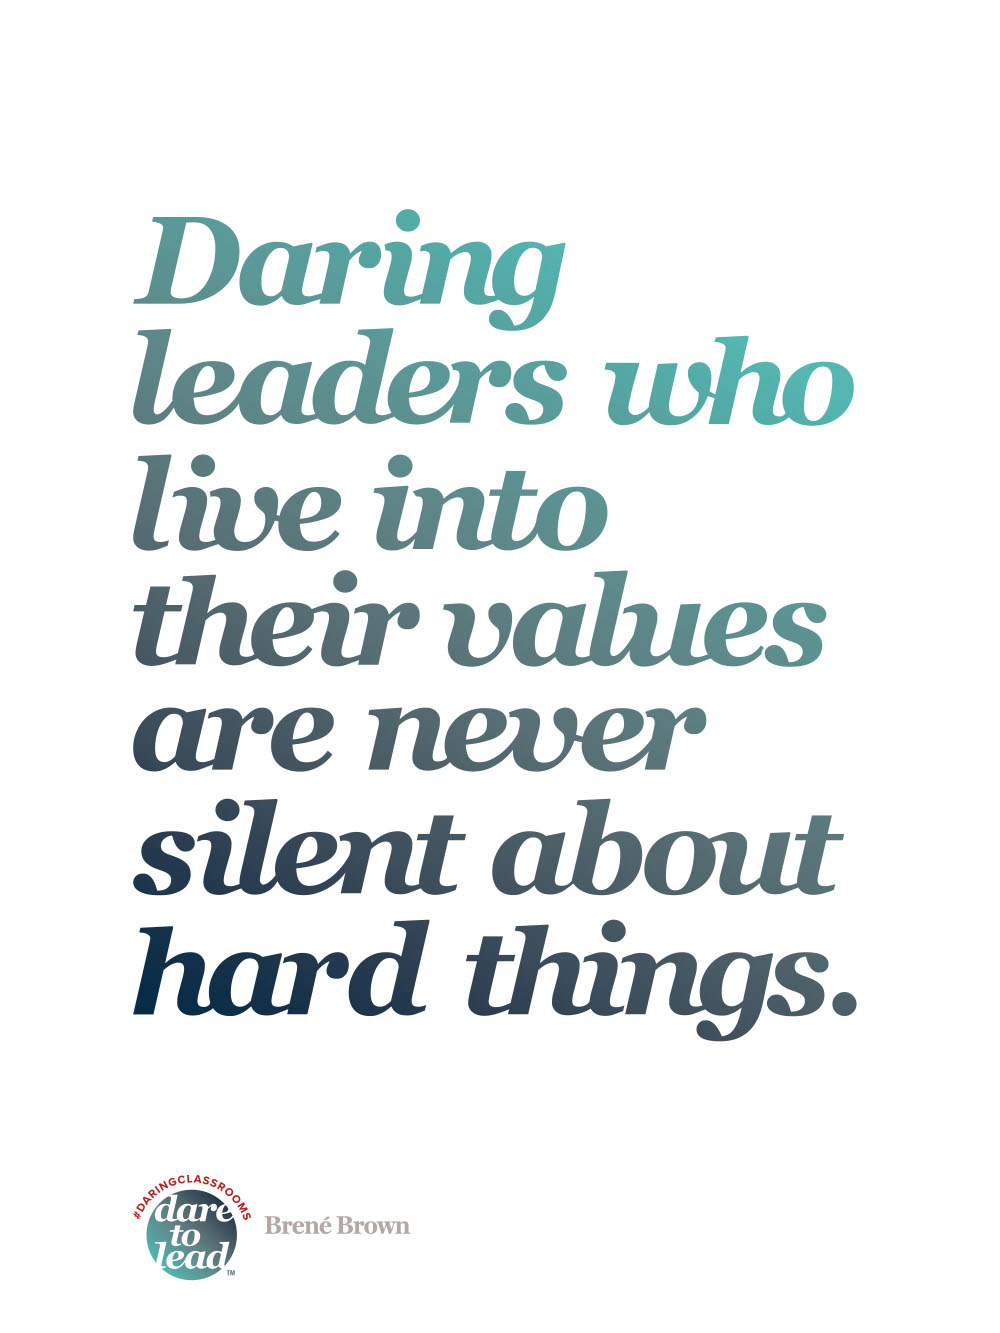 A quote from Dare to Lead by Brené Brown about how daring leaders have a clarity of values and don’t shy away from hard conversations.